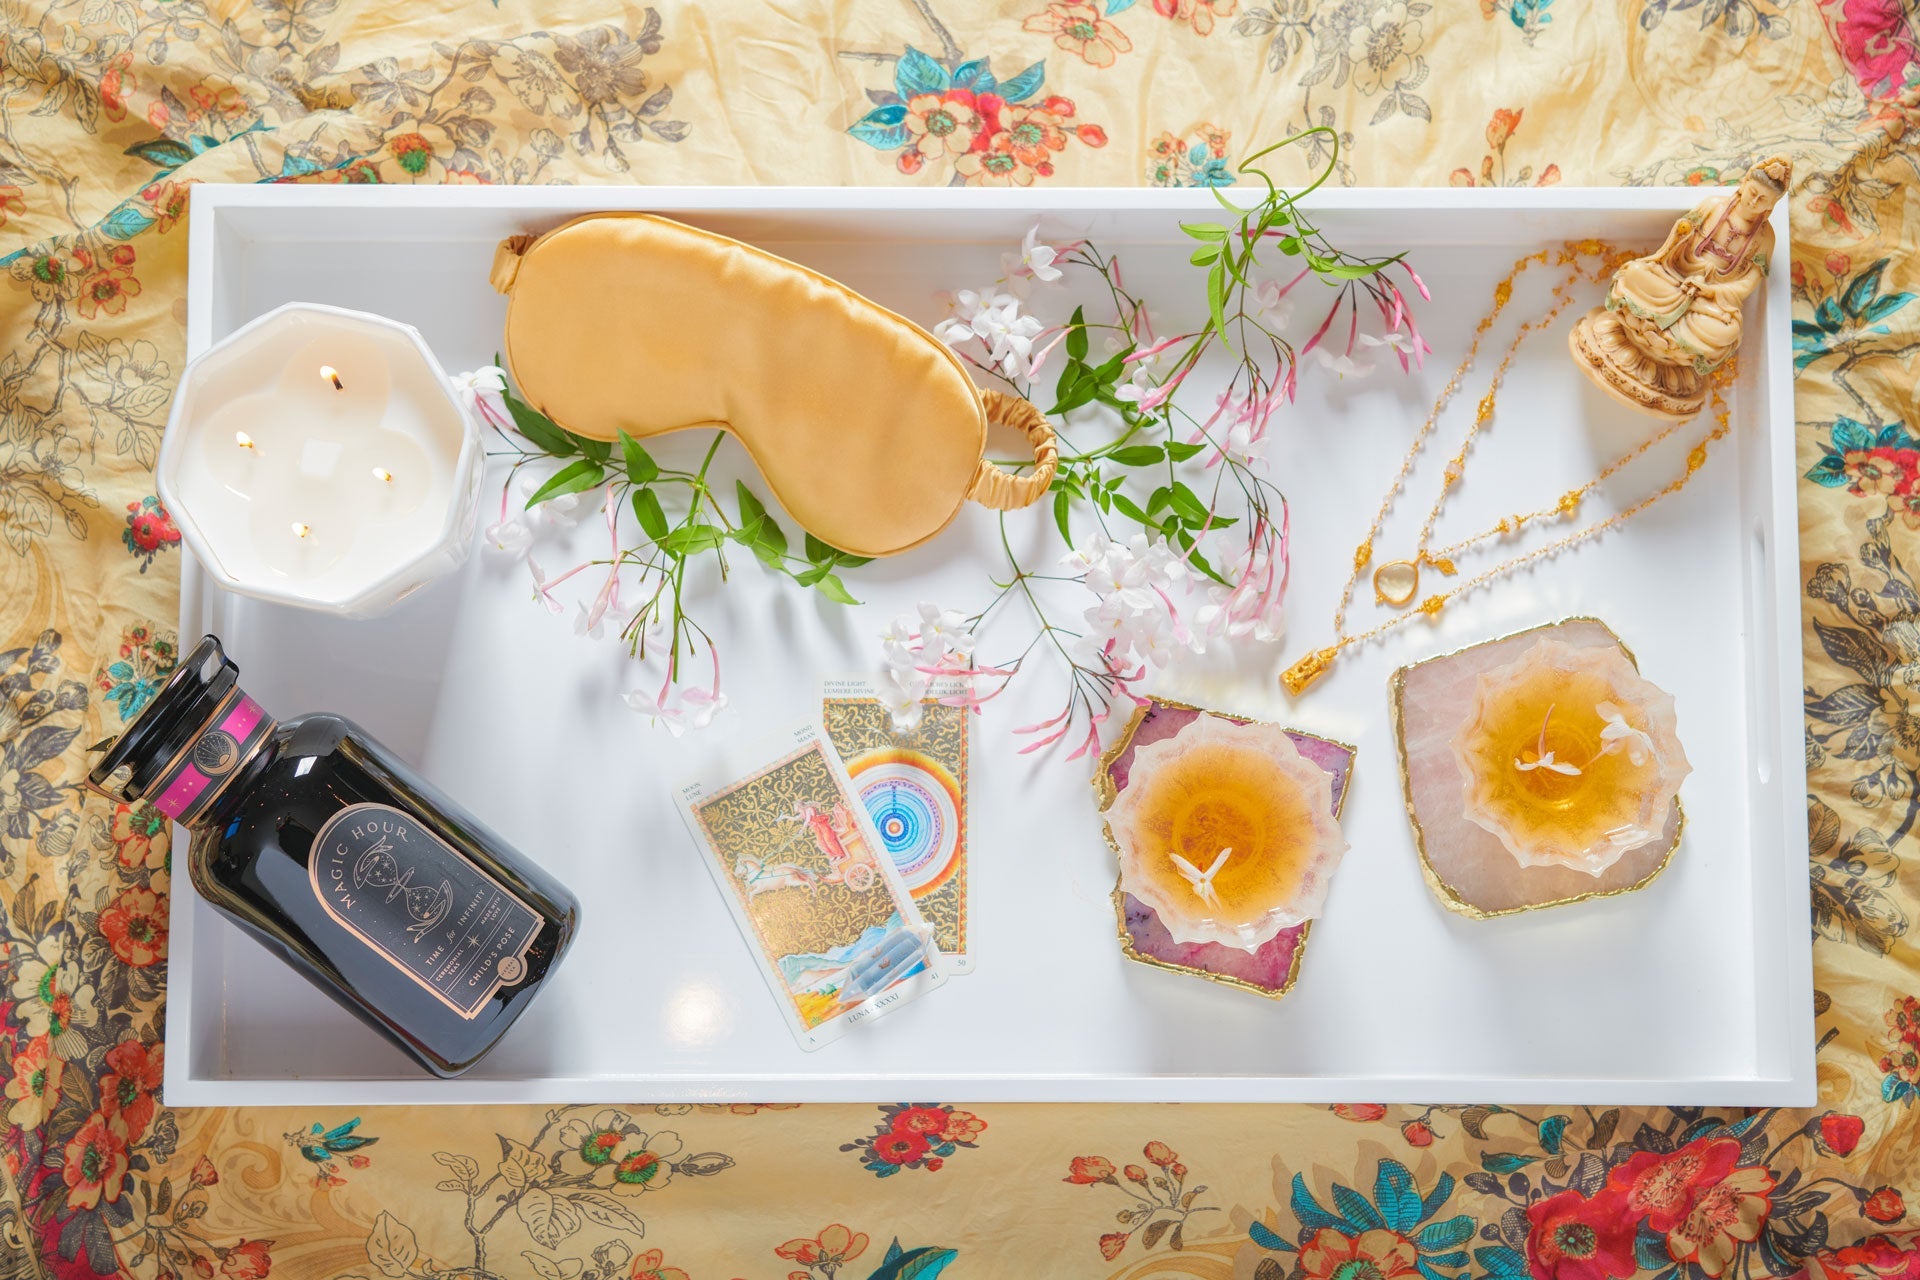 A flat lay photo of a rectangular white tray displaying two gemstone candle holders, a bottle of sleep potion, tarot cards, a sleep mask, a candle, a small golden statue, a necklace, and pink flowers, all on a floral fabric background.